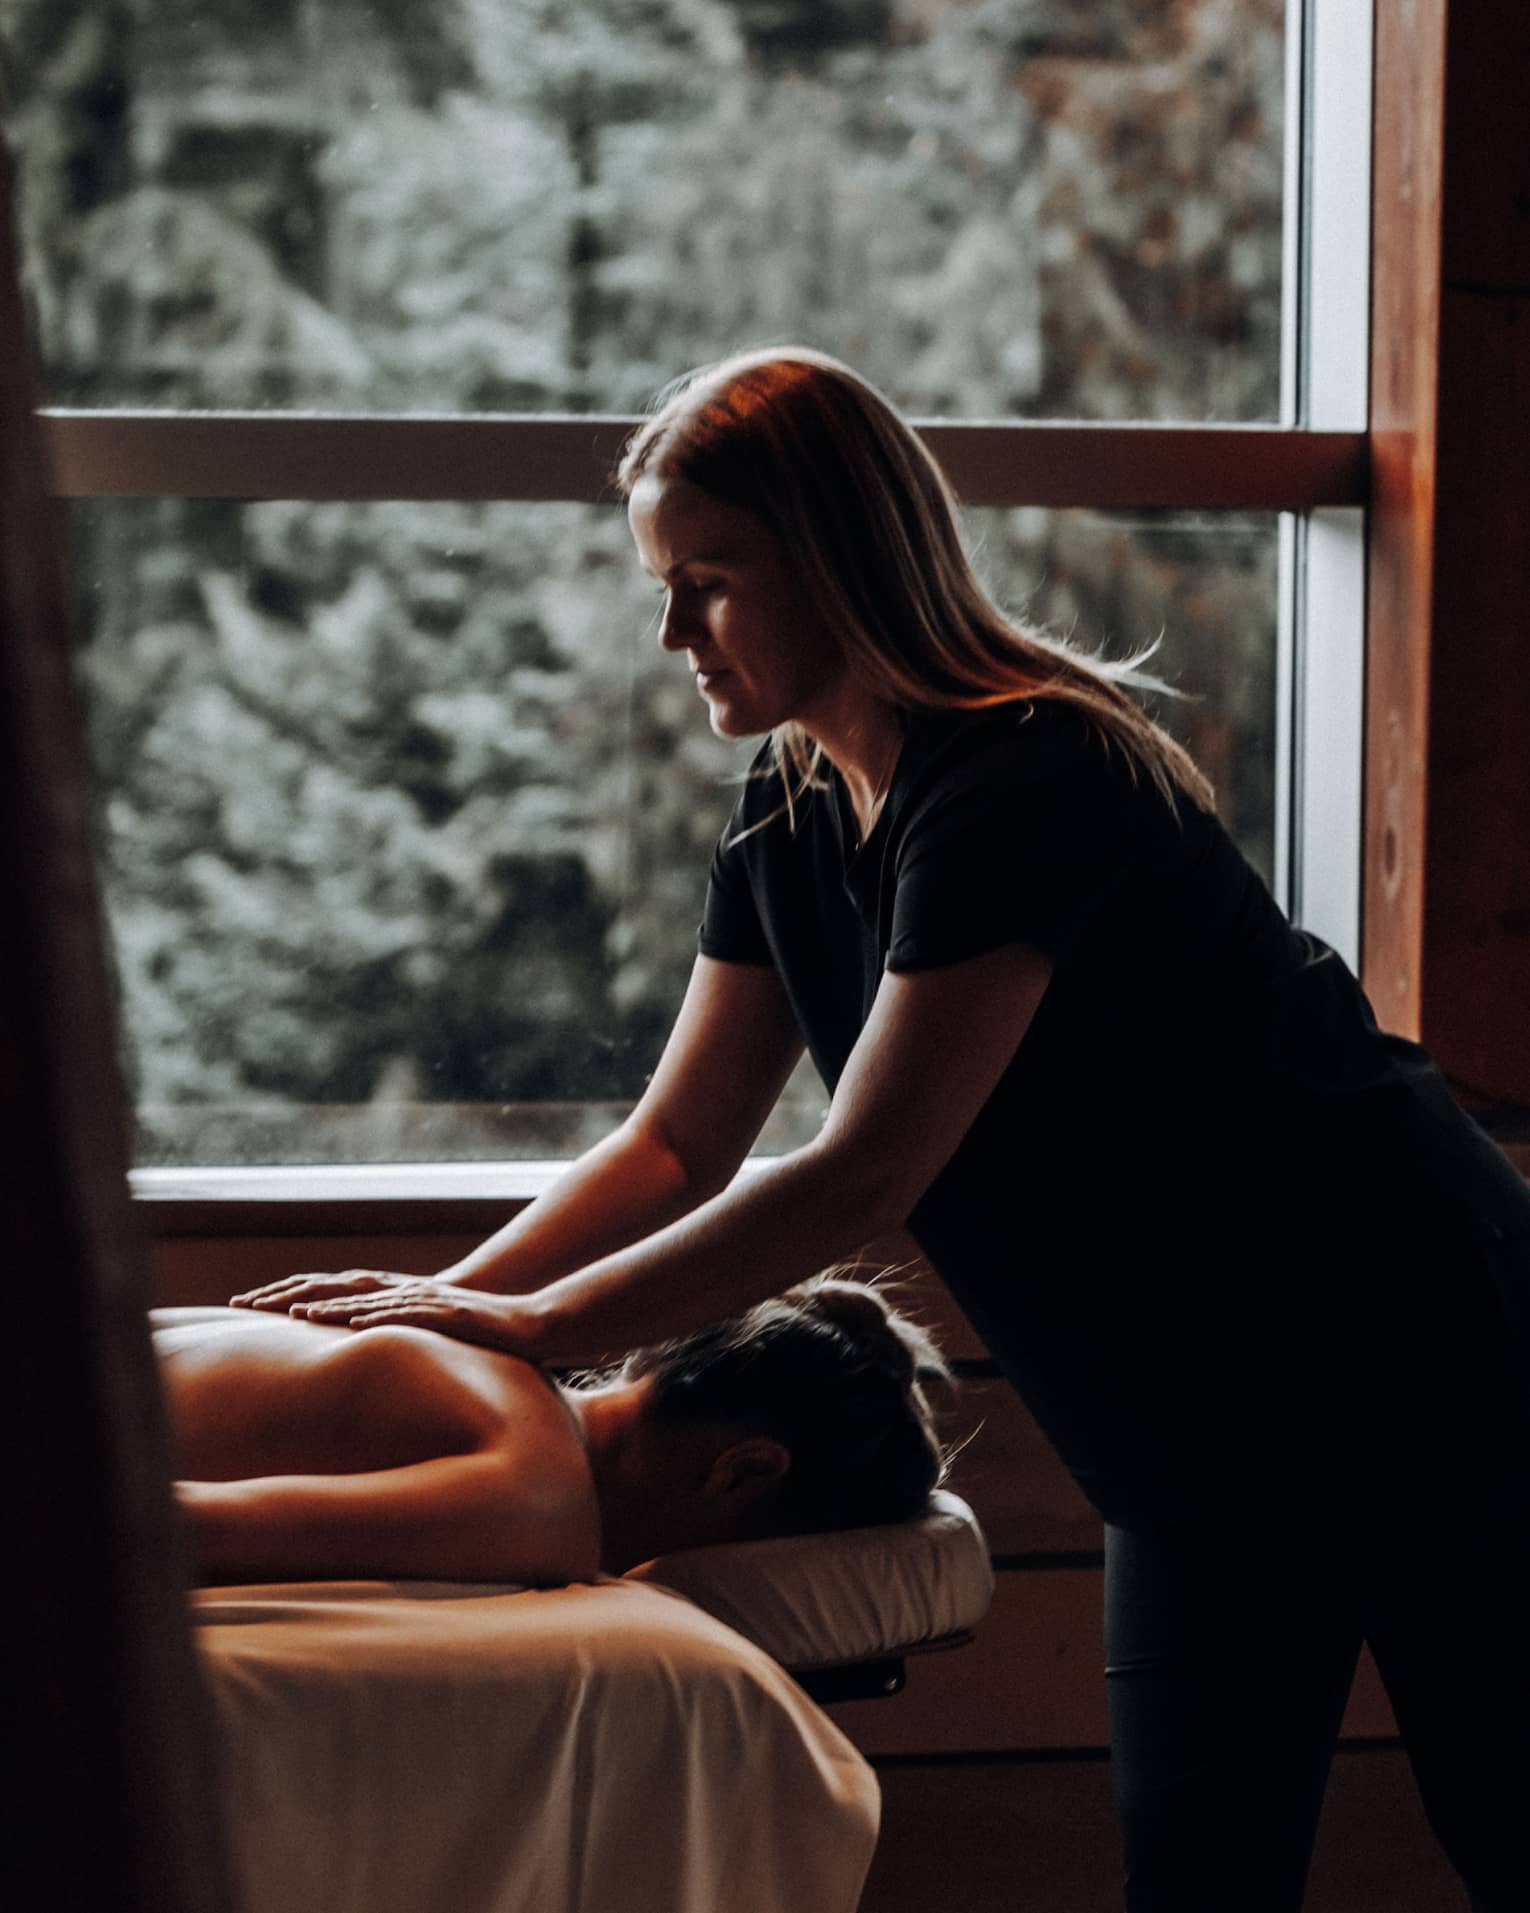 A woman receicing a massage in a dimly lit room.